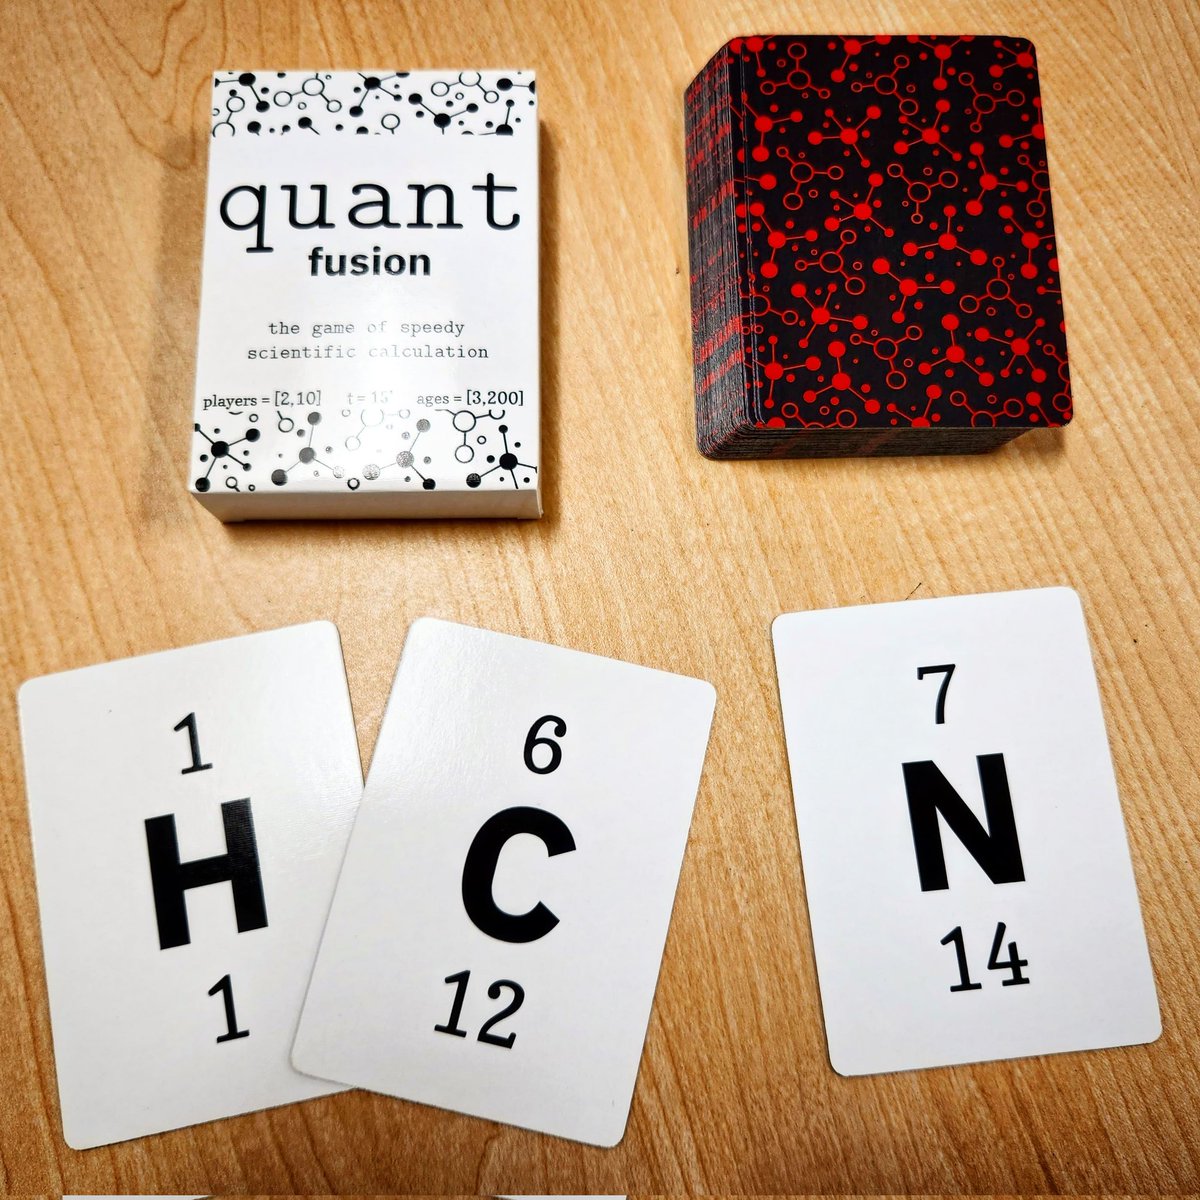 Nitrogen makes up 78% of our atmosphere. It's formed when Carbon and Helium fuse in massive stars. Learn more math chemistry and physics playing Quant Fusion!
@nuclearsciweek
#nuclearsciweek 
#trivia
#boardgames
amazon.ca/Golem-Games-Qu…